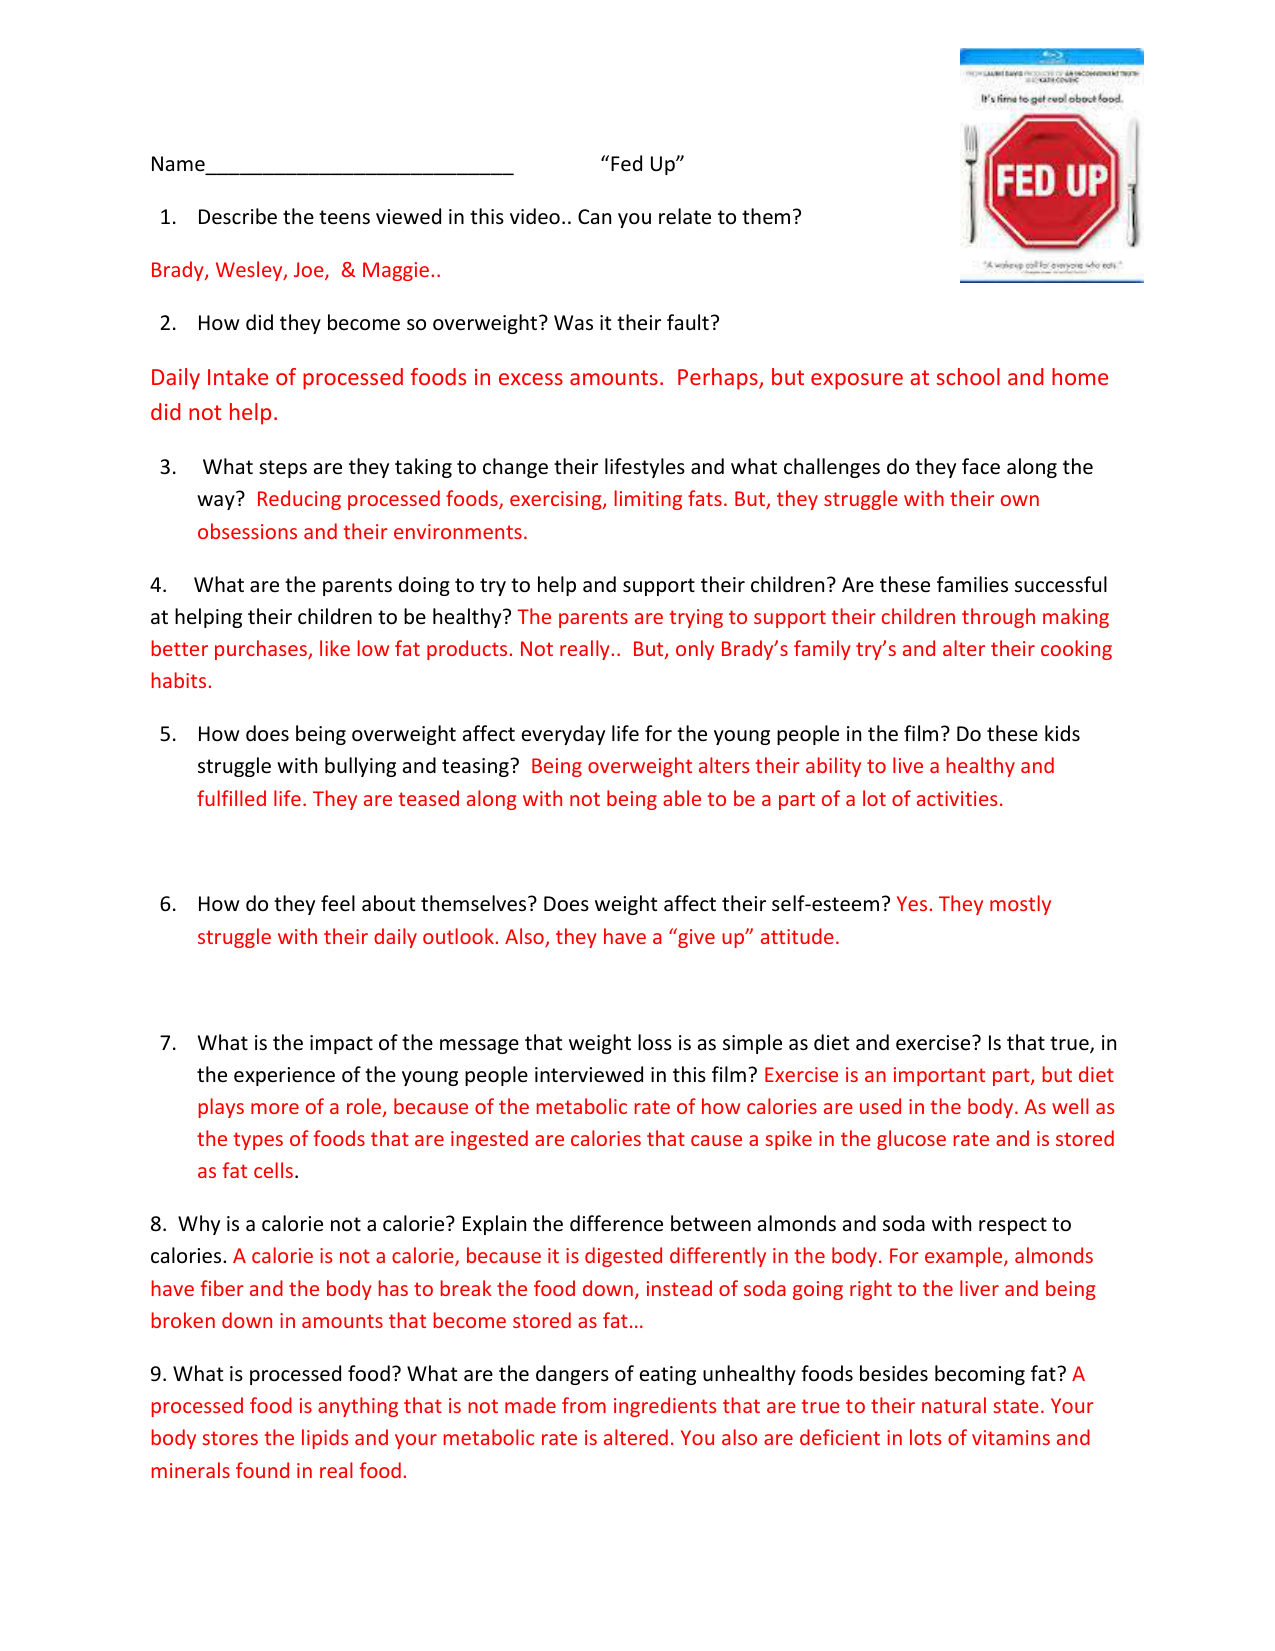 Fed up" Key to questions from documentary Intended For Fed Up Worksheet Answer Key